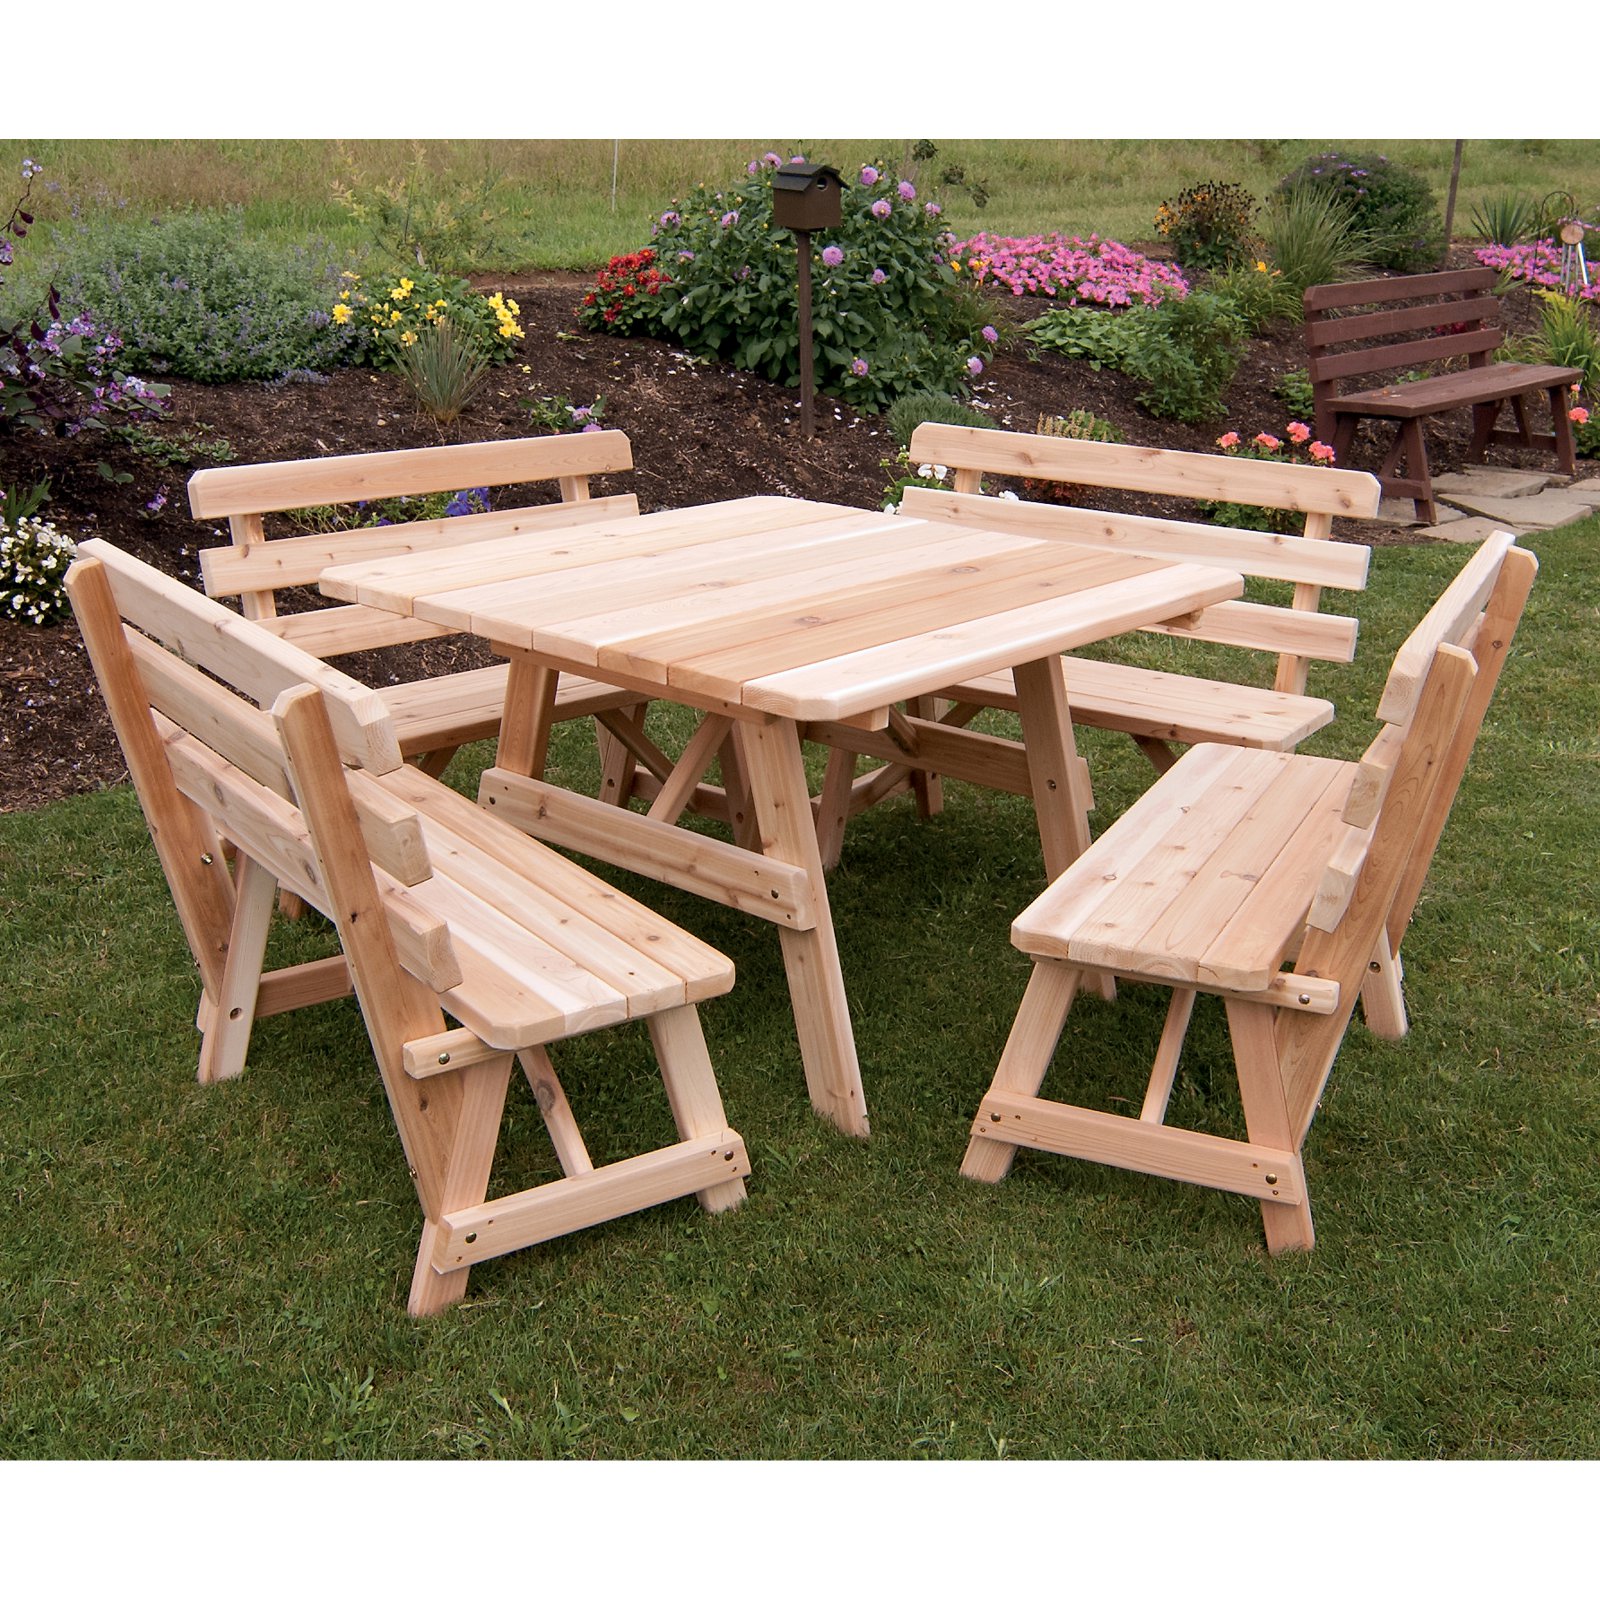 A &amp; L Furniture Western Red Cedar 5 pc. 43 in. Square Table Set with 4 Backed Benches and Optional Umbrella Hole - image 1 of 2